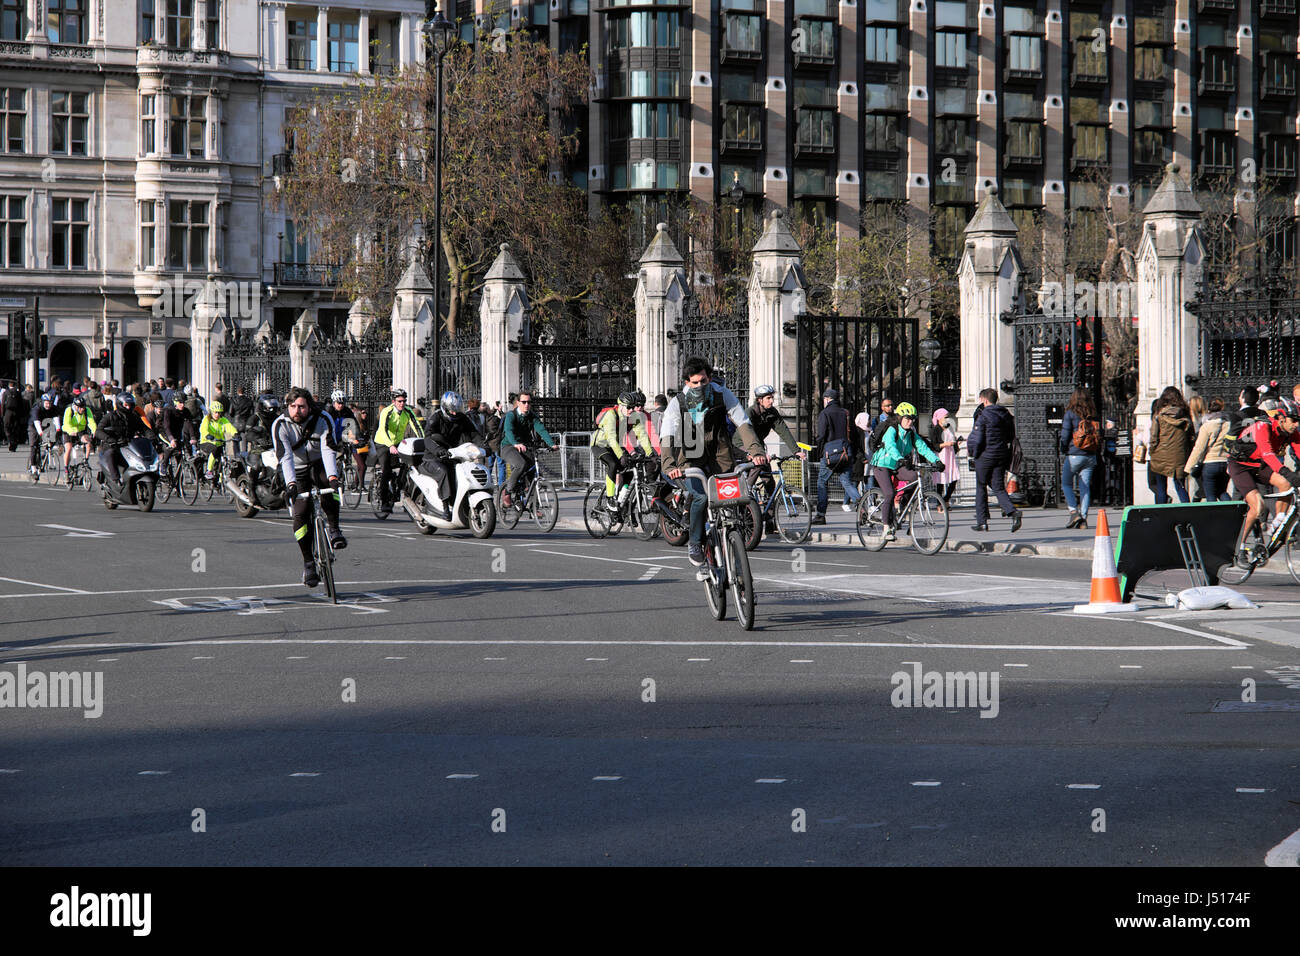 Commuters cyclists leaving work cycling near Parliament Square outside the Houses of Parliament in Westminster, London England UK  KATHY DEWITT Stock Photo